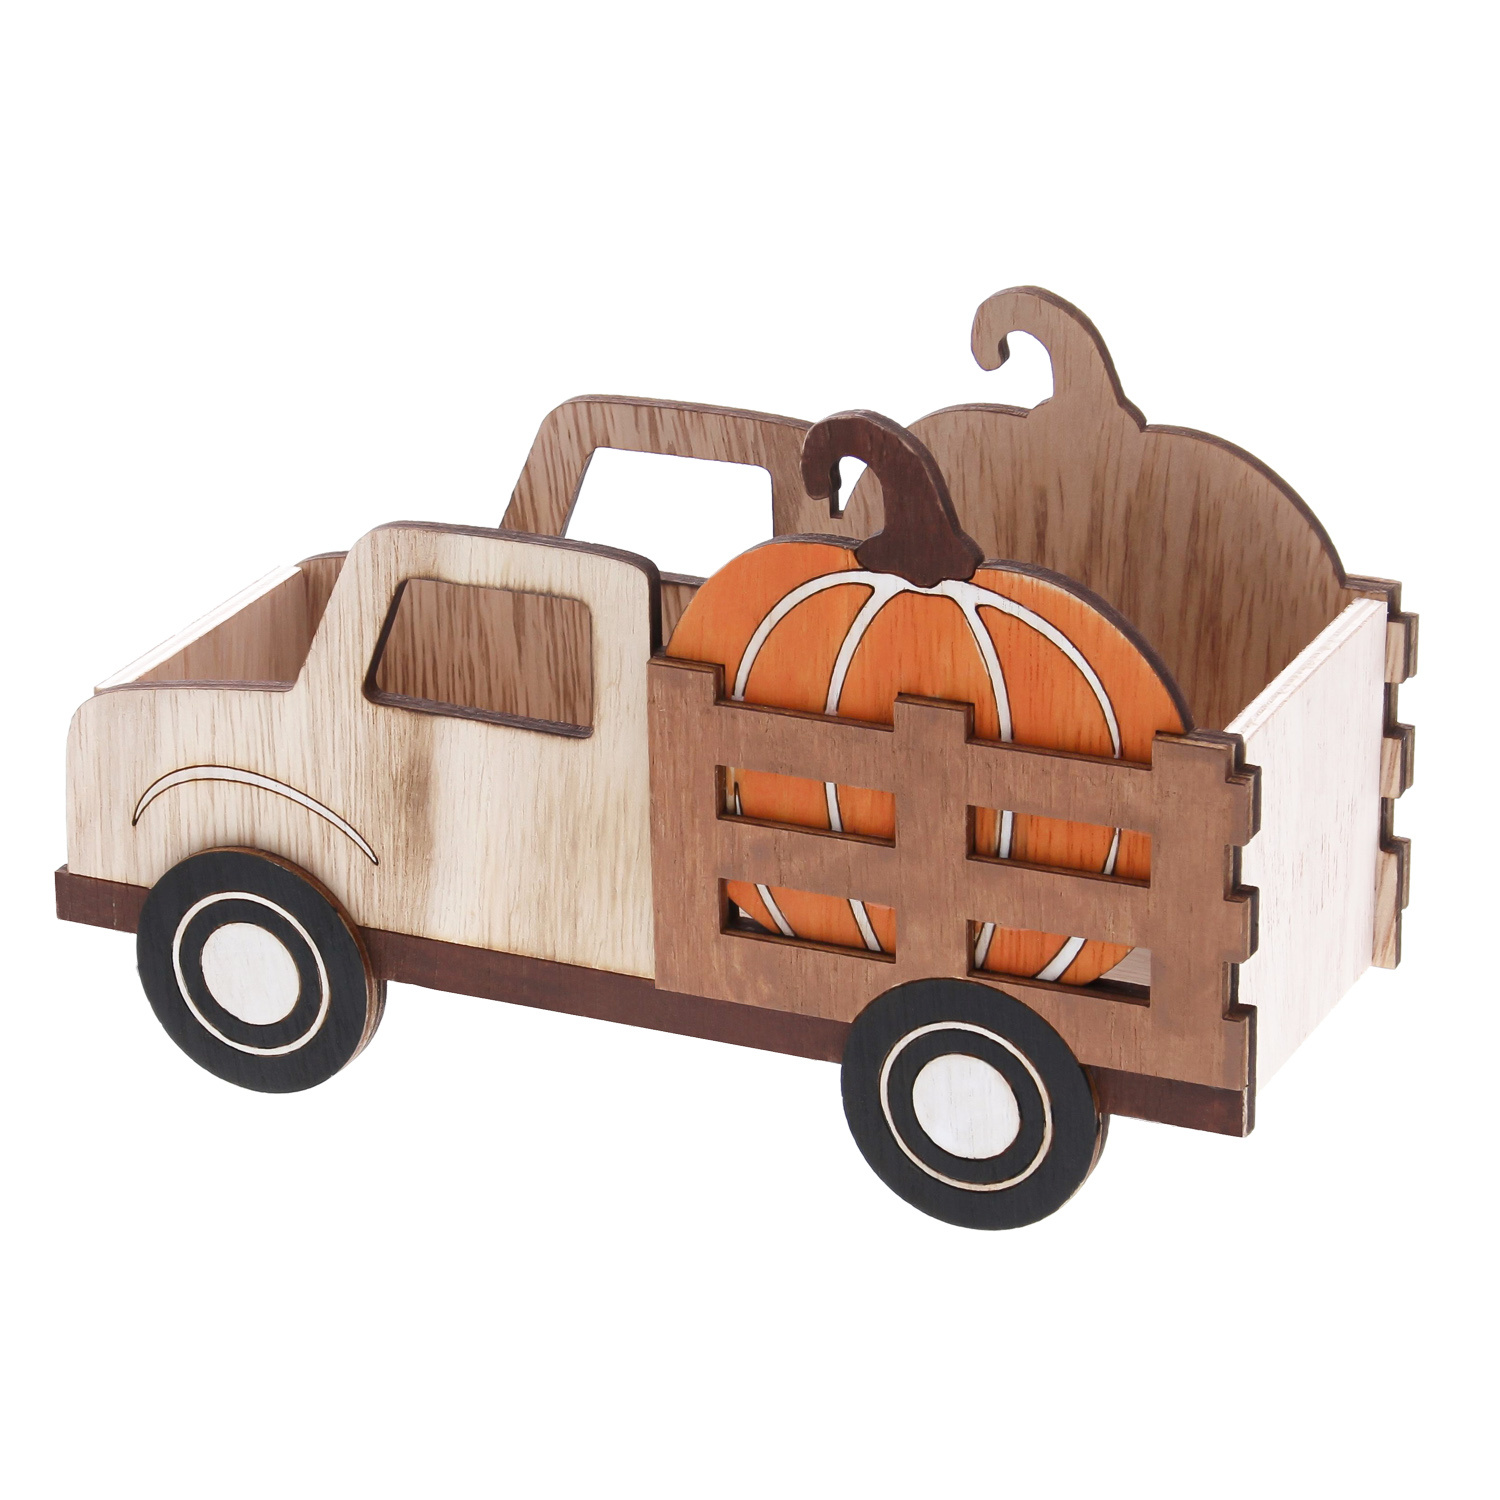 Truck with pumpkin open container - 195*125*73mm - 3 pieces